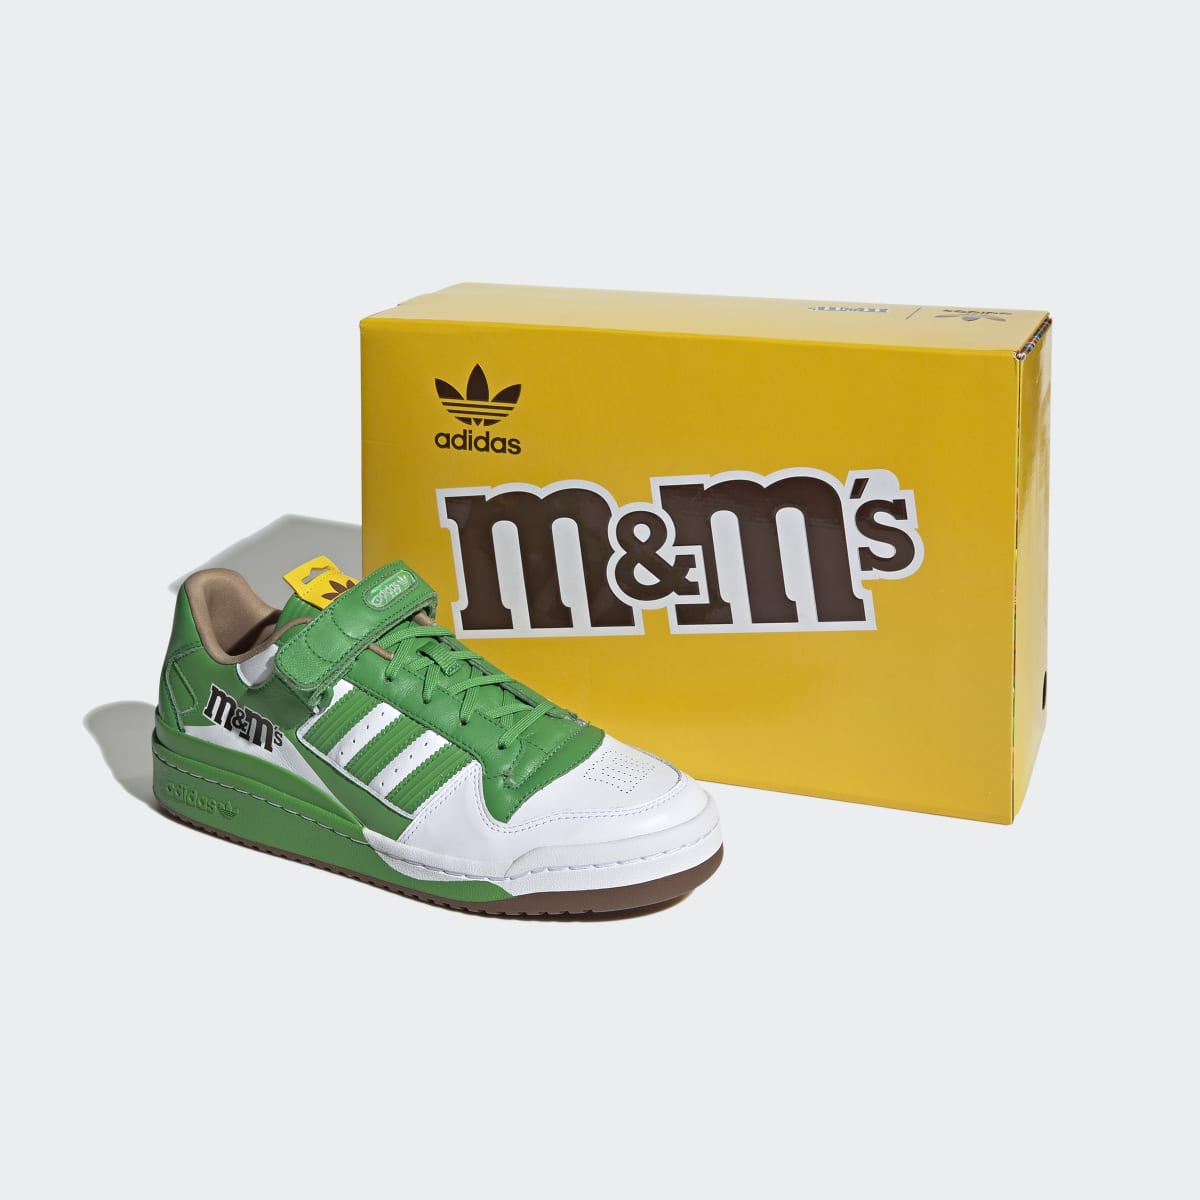 MMS x adidas Forum Low Green Cloud White Eqt Yellow GY6314 1